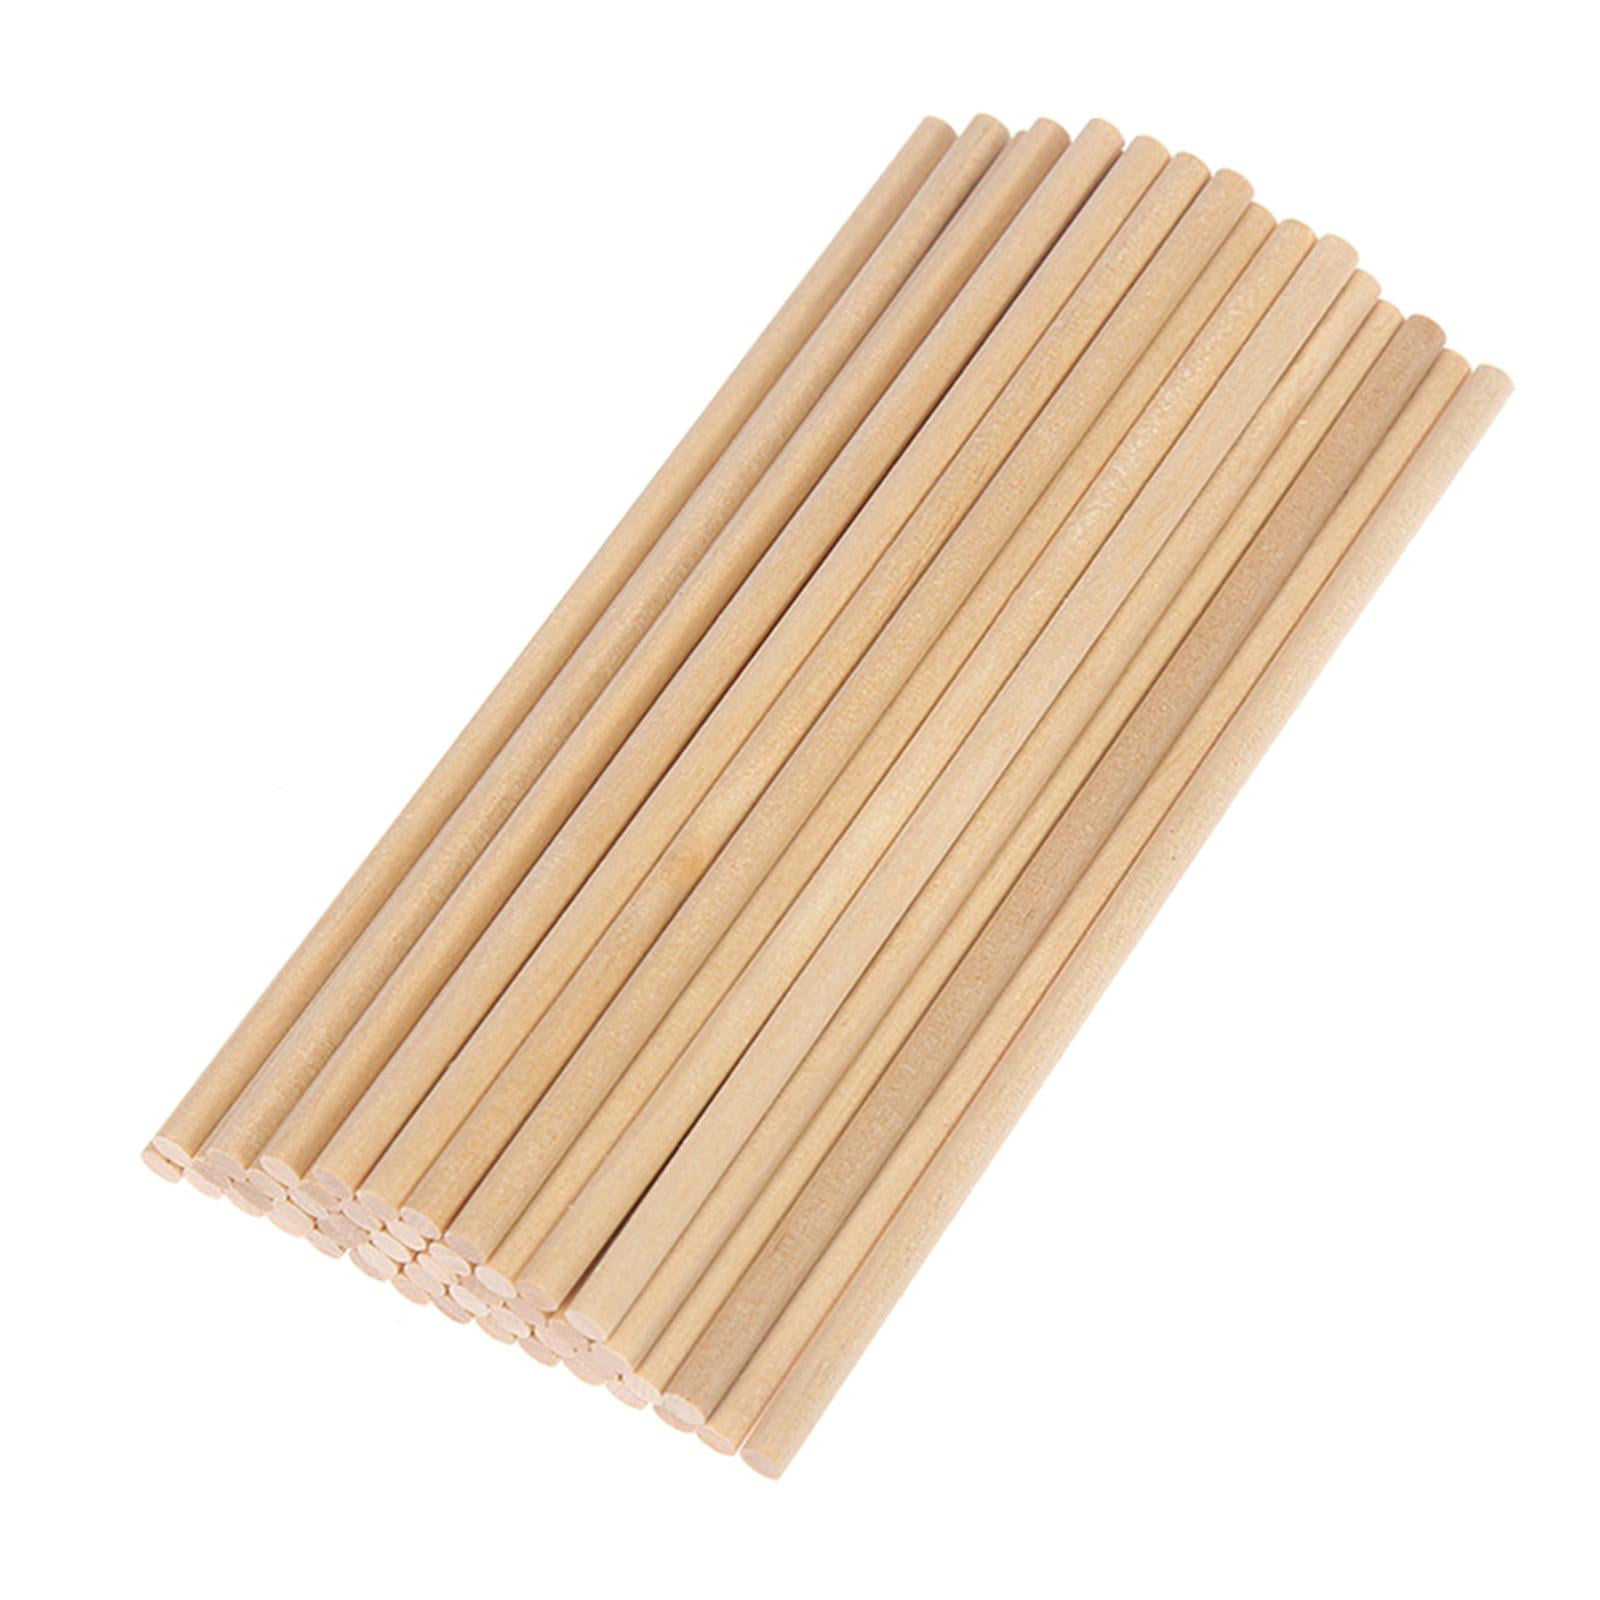  HJZALMI Sturdy Wooden Dowels, Unfinished Wooden Square Dowel  Rod, Craft Dowel Sticks for Crafting Woodcraft Decorations, Customization  Support (Color : 2x3cm-80pcs, Size : 80cm)